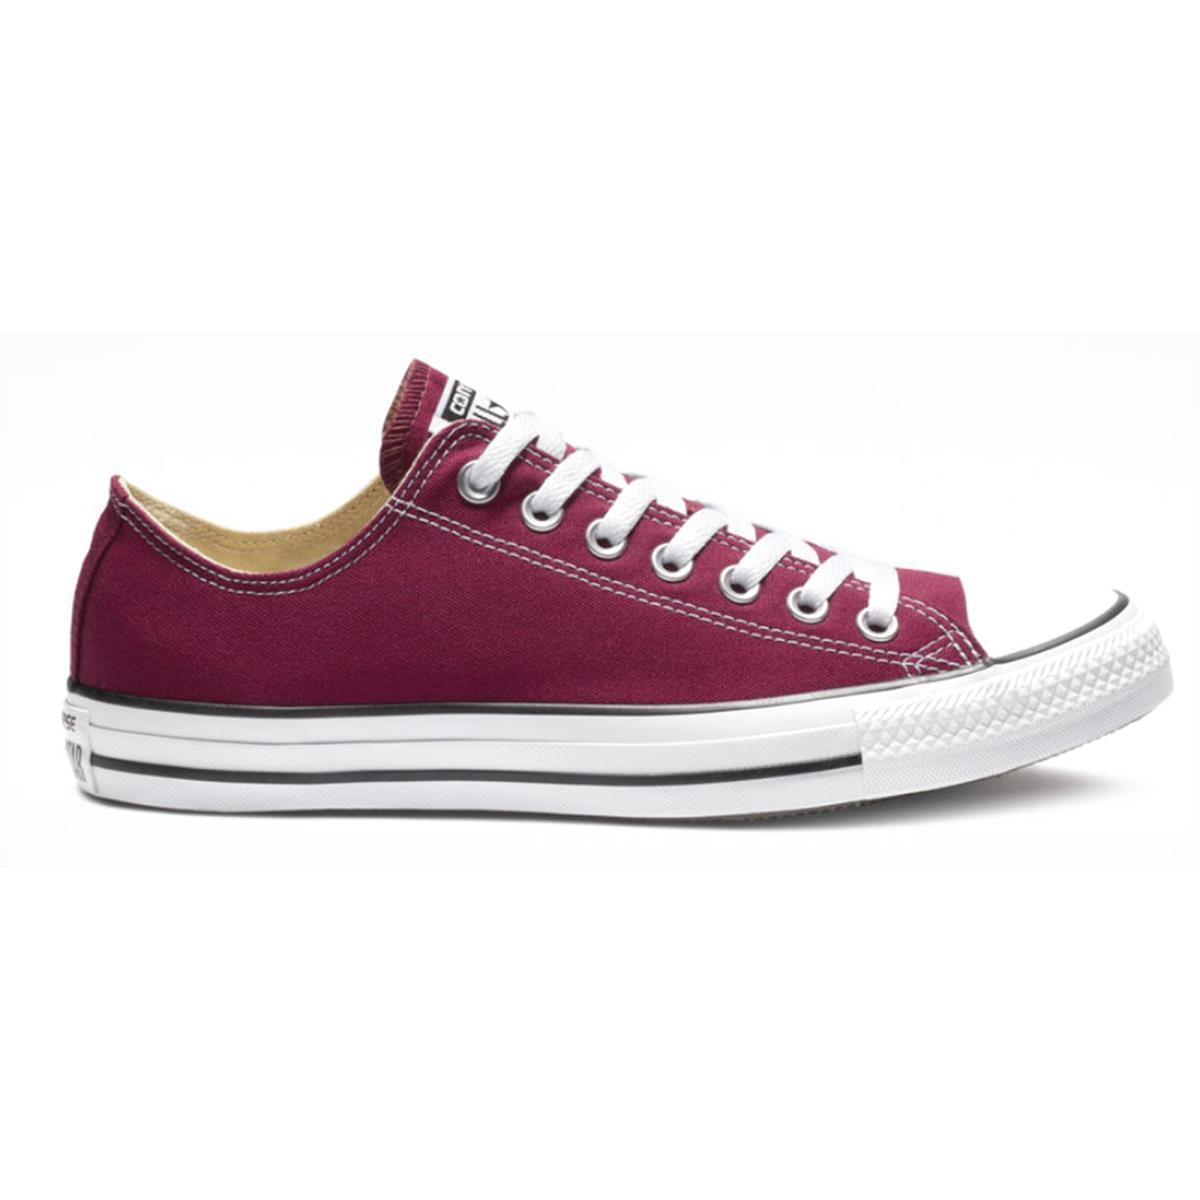 Classic Converse Unisex Chuck Taylor All Star Low Sneaker Canvas Upper Mens Size Maroon